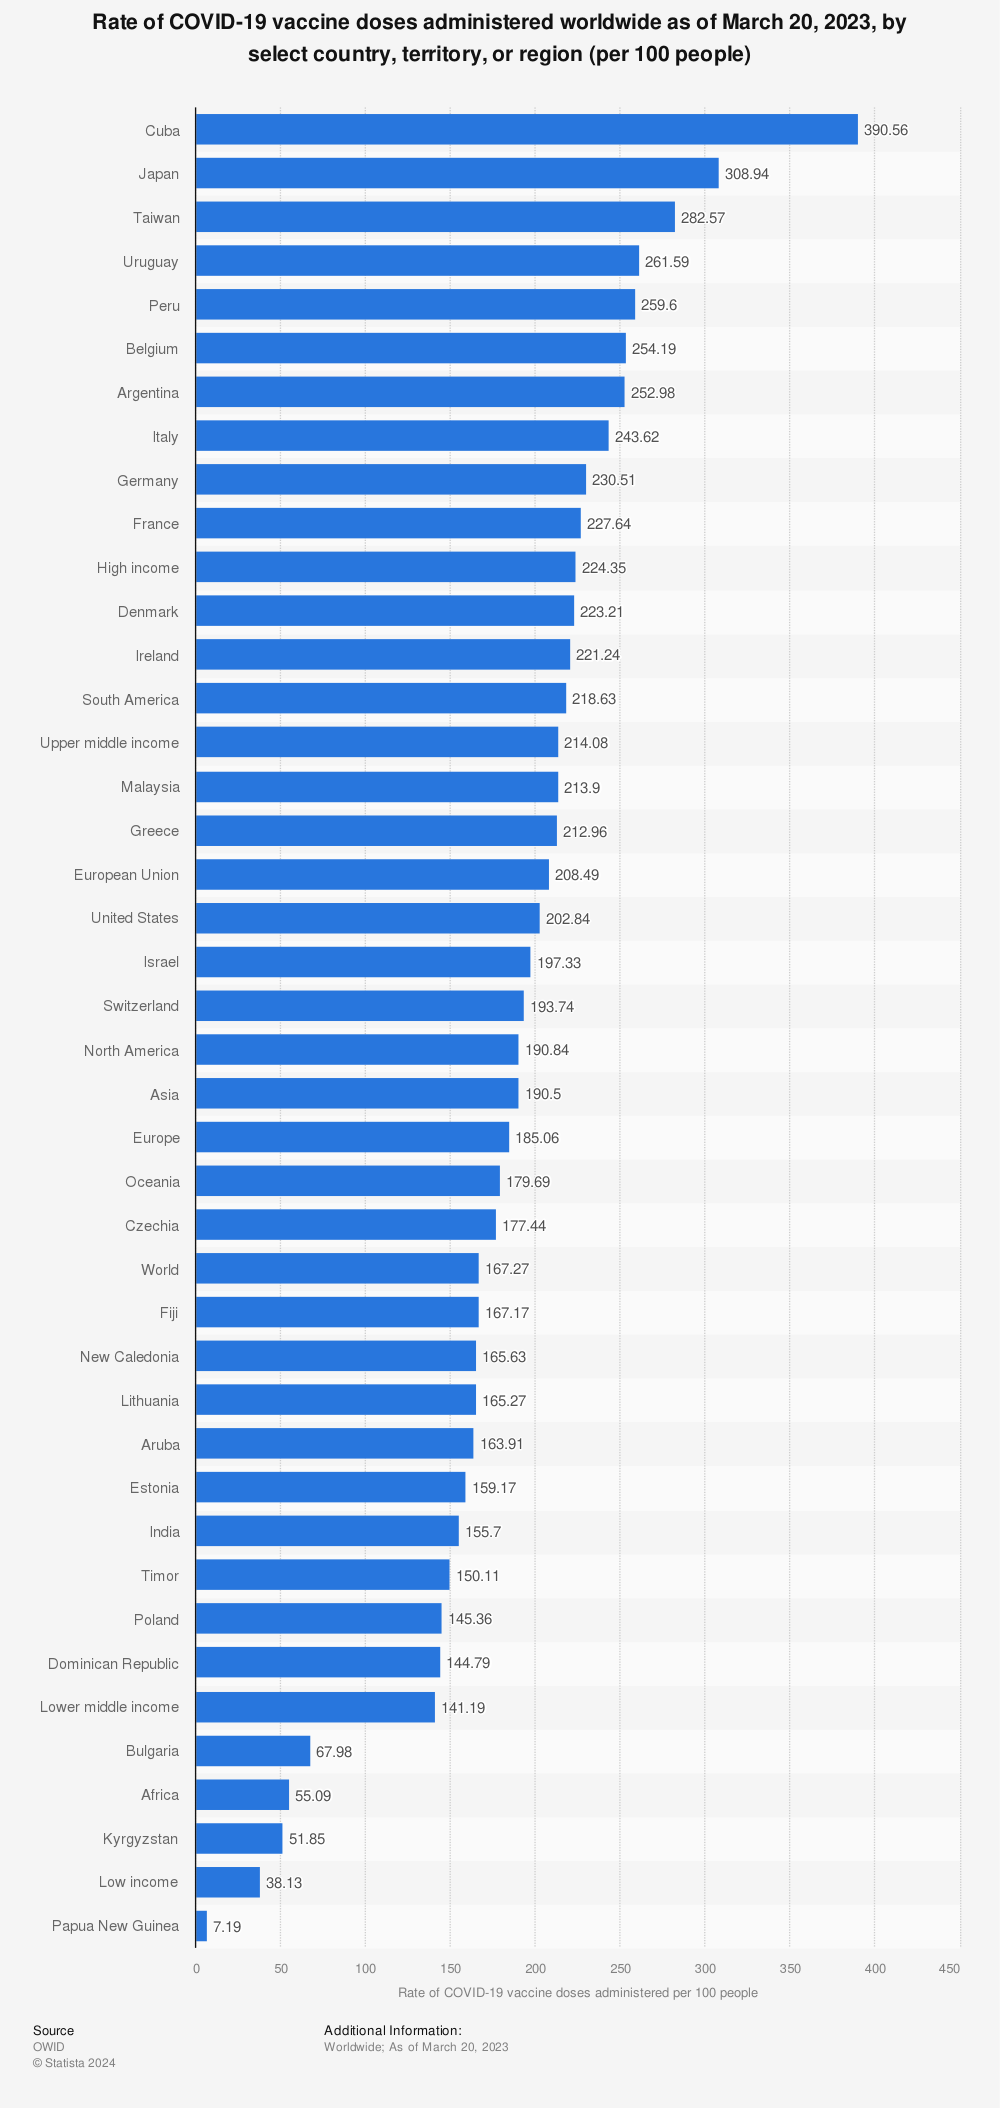 Statistic: Rate of COVID-19 vaccine doses administered worldwide as of January 20, 2022, by select country or territory (per 100 people) | Statista